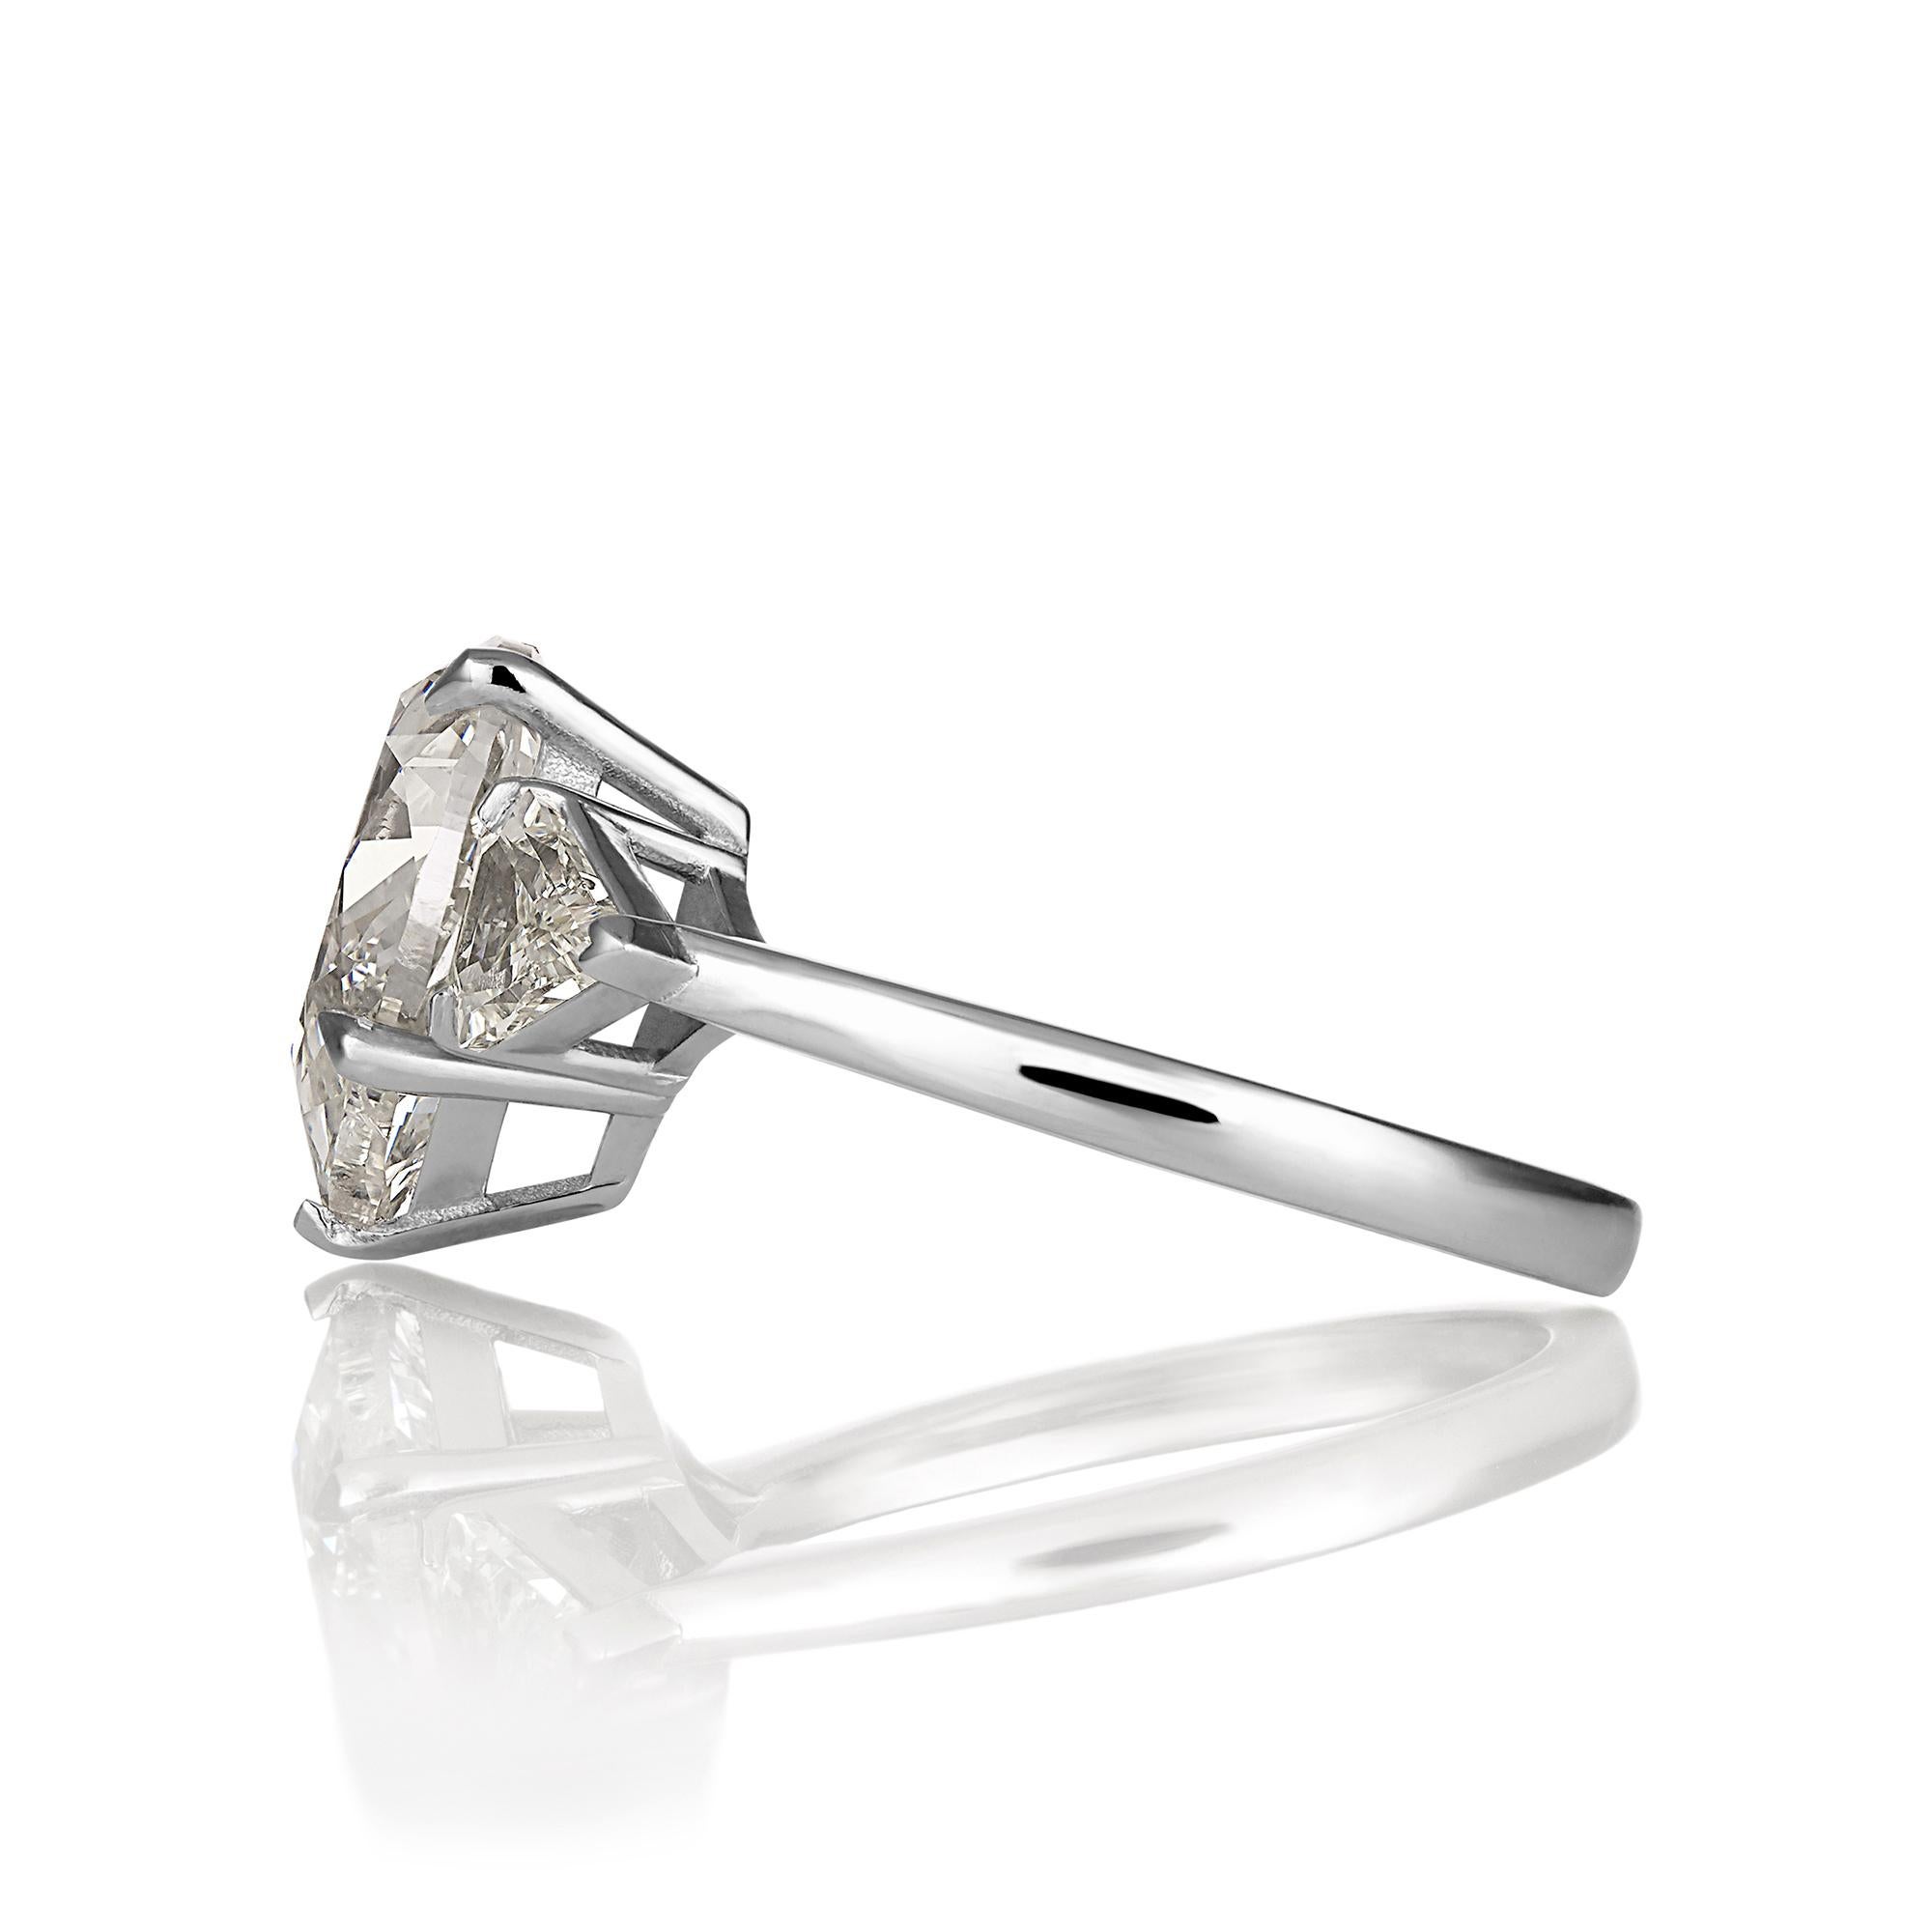 This a Beautiful Estate Vintage Pear Shaped Solitaire Ring with 2 Large Kite Diamonds, 3.62ct in total weight.
The center diamond is 3.01ct, L color, SI2 (warm white and eye clean), GIA CERTIFIED #7386994739.
GREAT CUT and BRILLIANCE! The